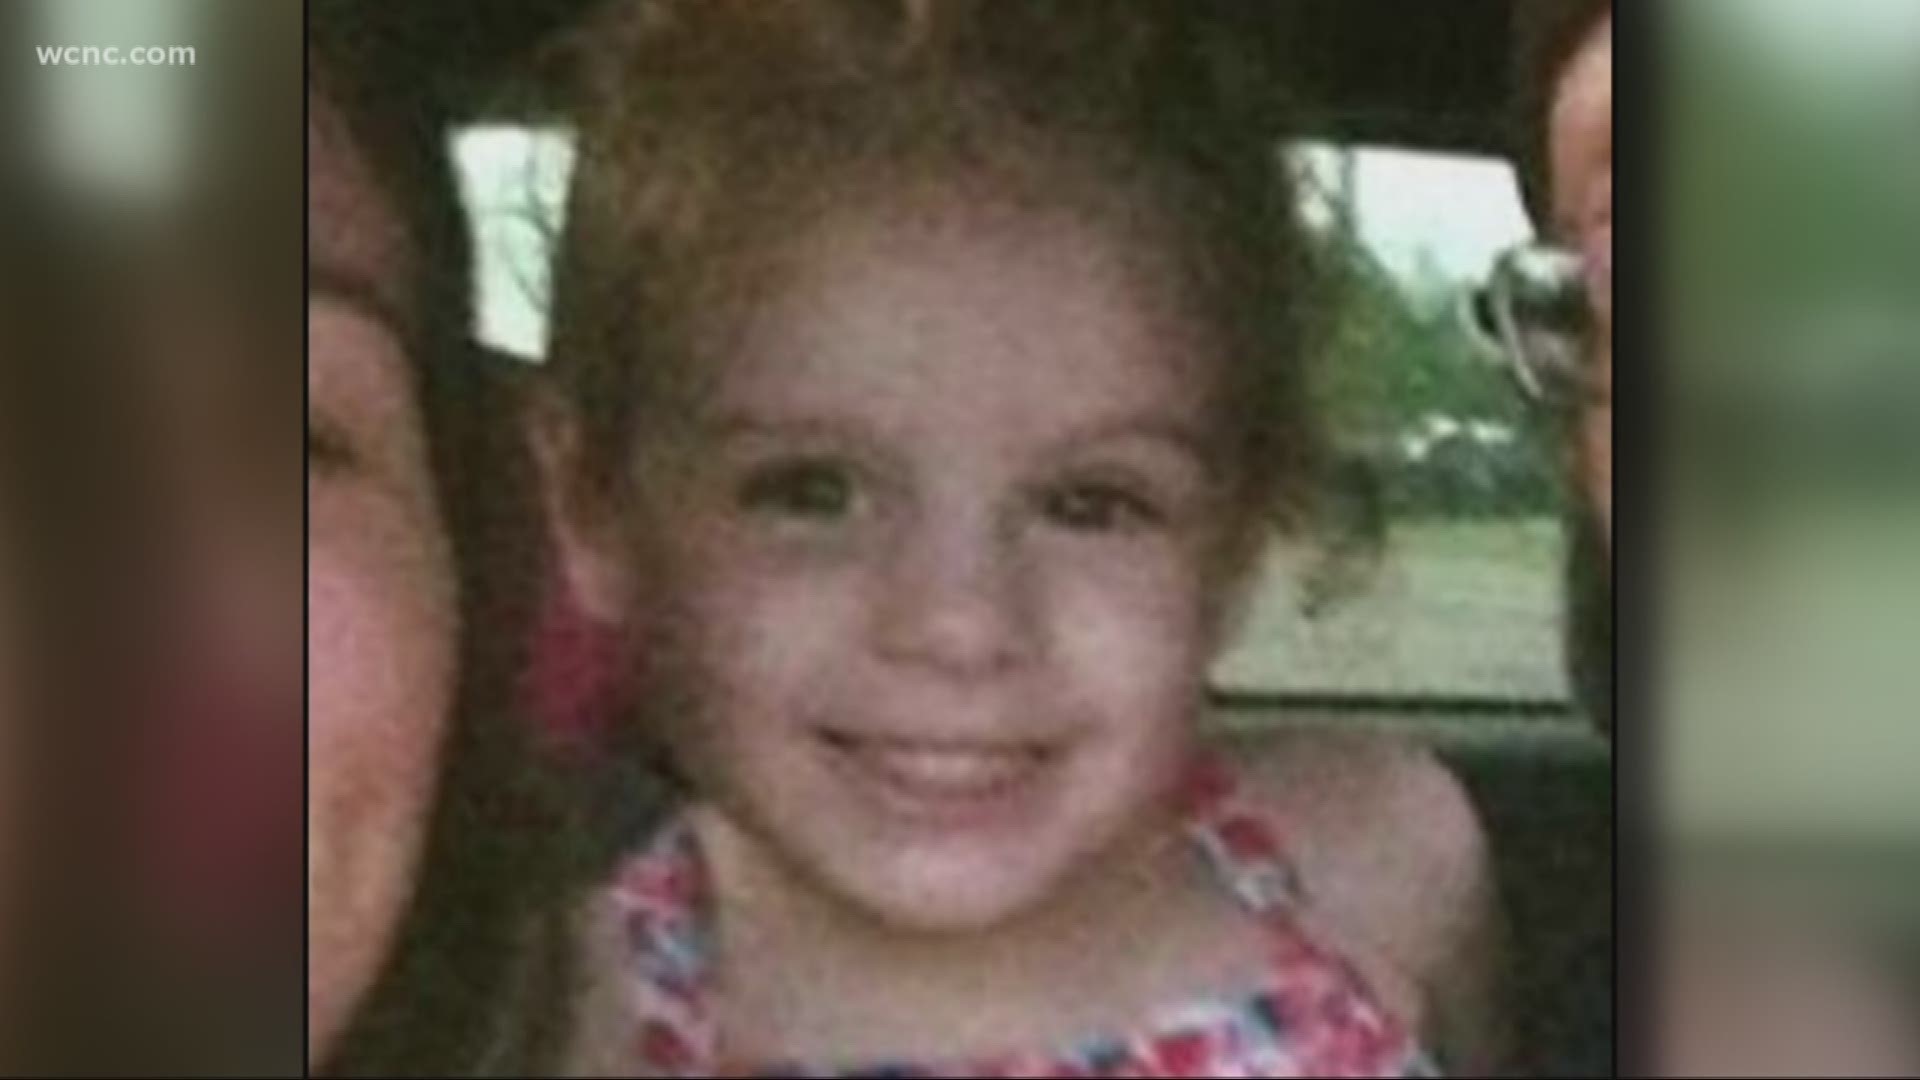 The jury selection in the murder of a 3-year-old Gaston County girls is set to begin Monday.